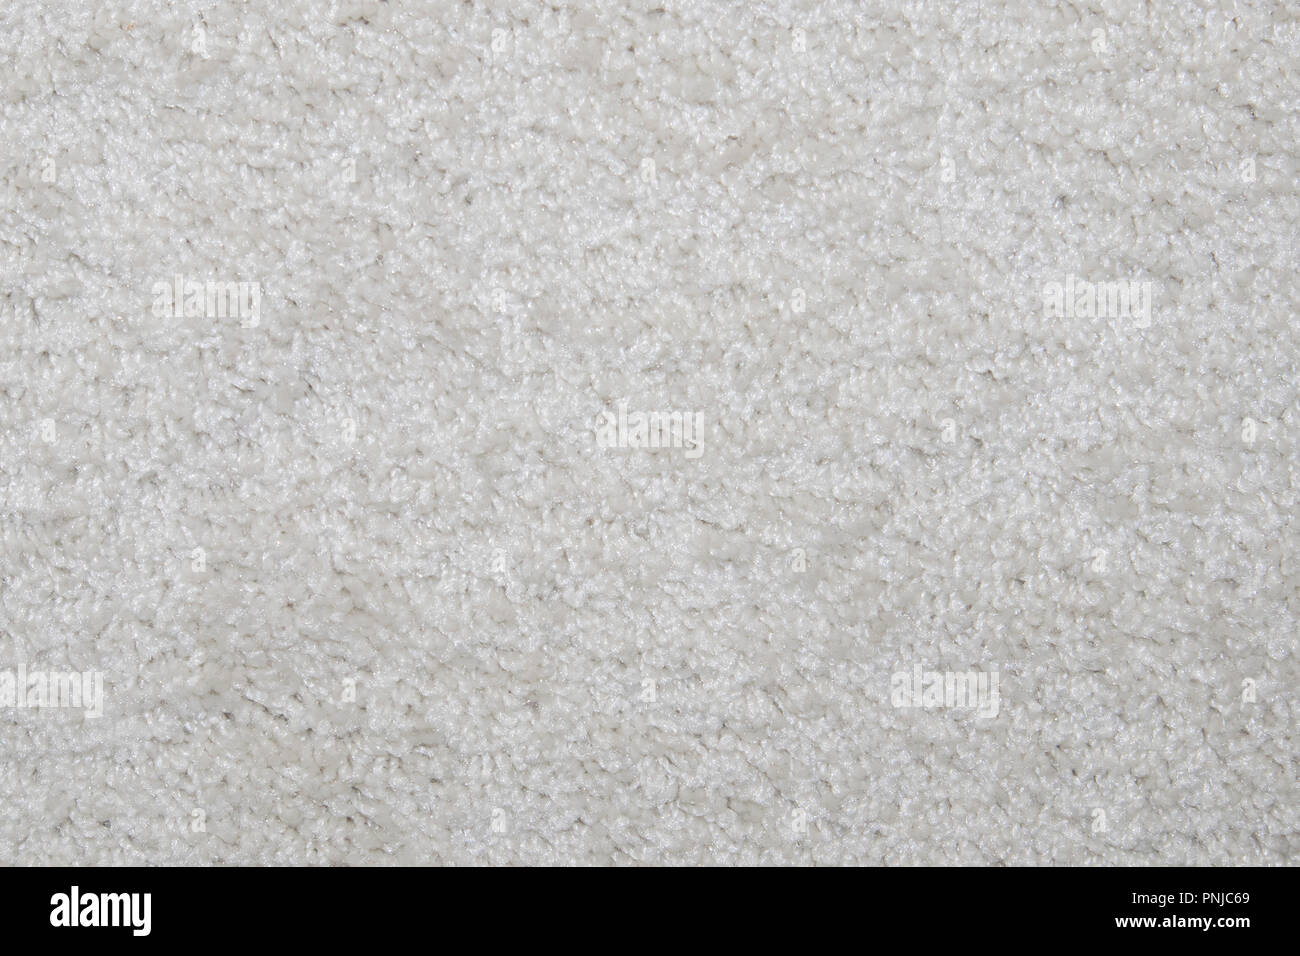 White synthetic short-napped floor carpet covering, may be used as background or texture Stock Photo